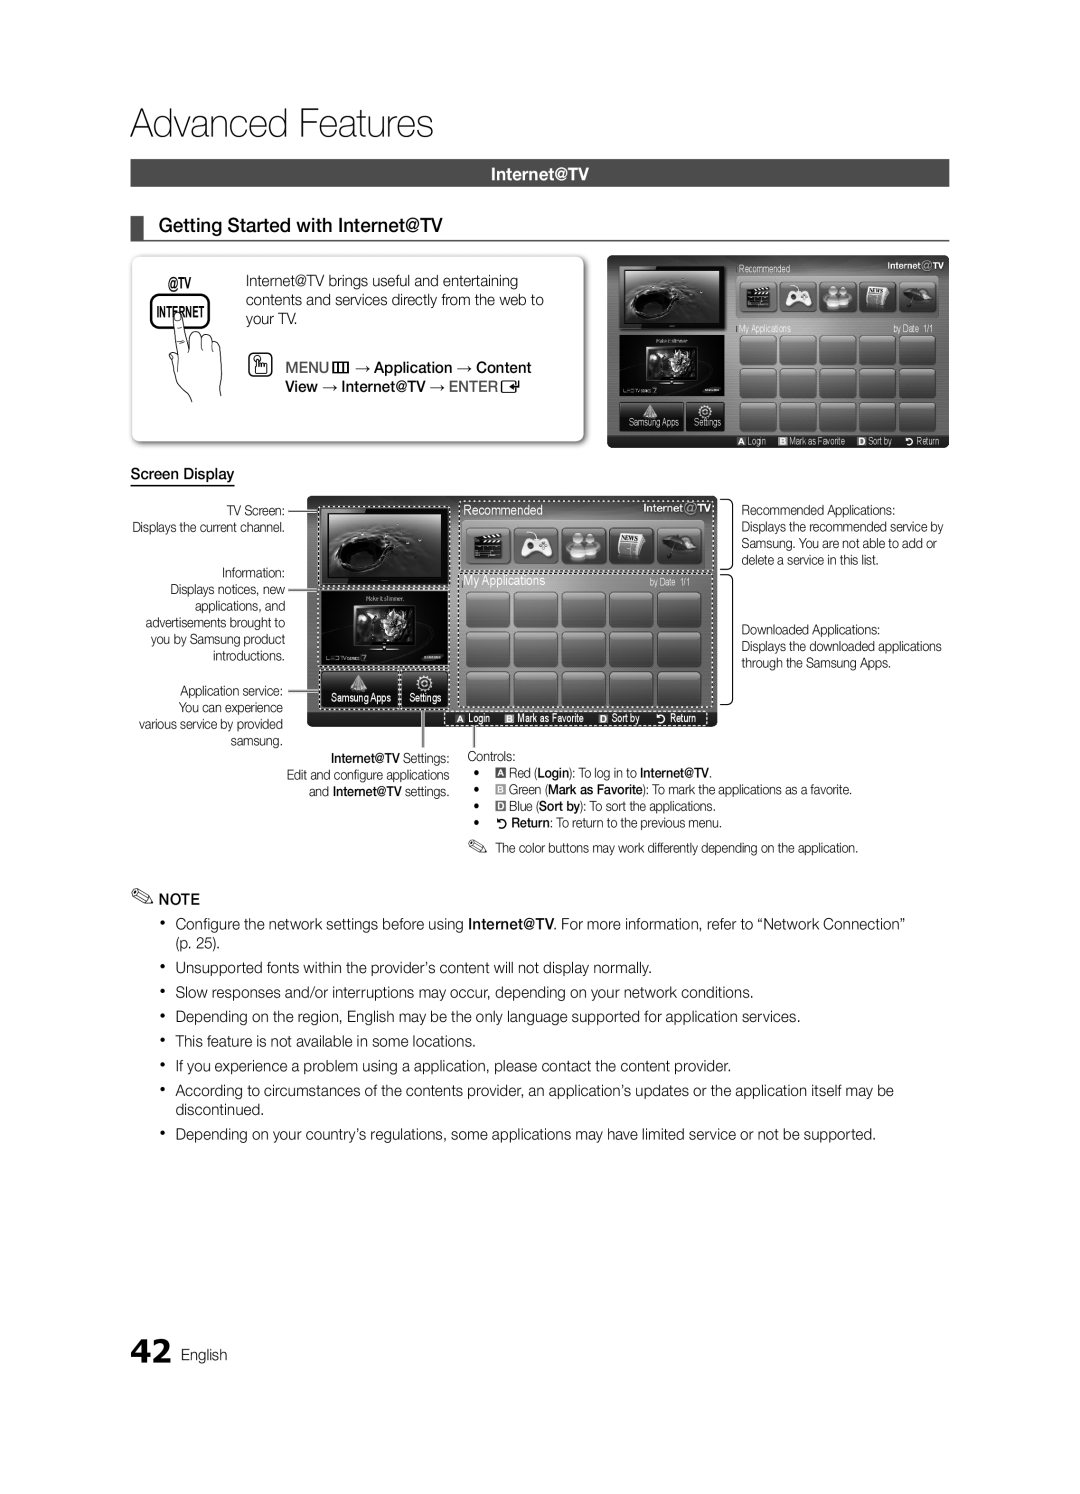 Samsung 6800 user manual Getting Started with Internet@TV, @Tv Internet, Advanced Features 